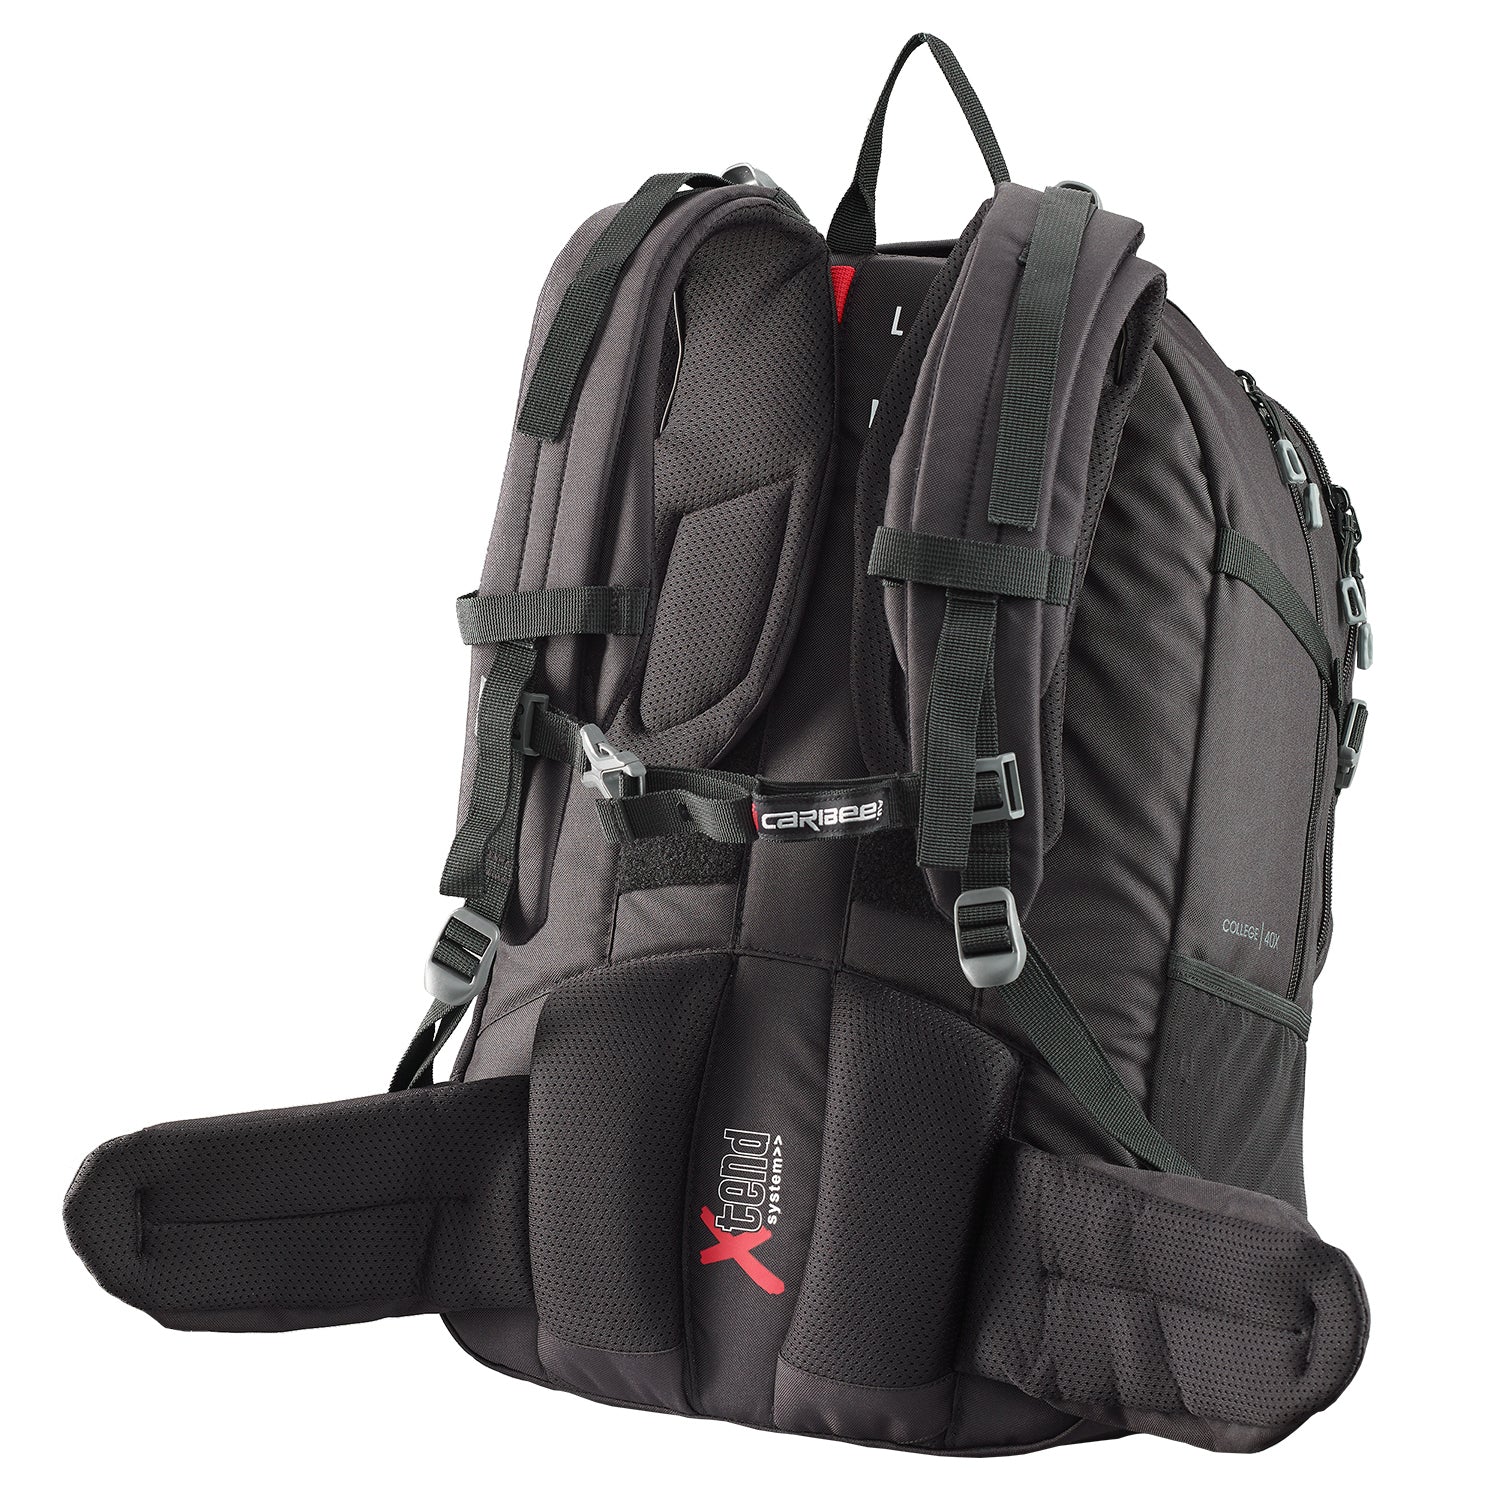 Caribee College 40L backpack's adjustable harness system